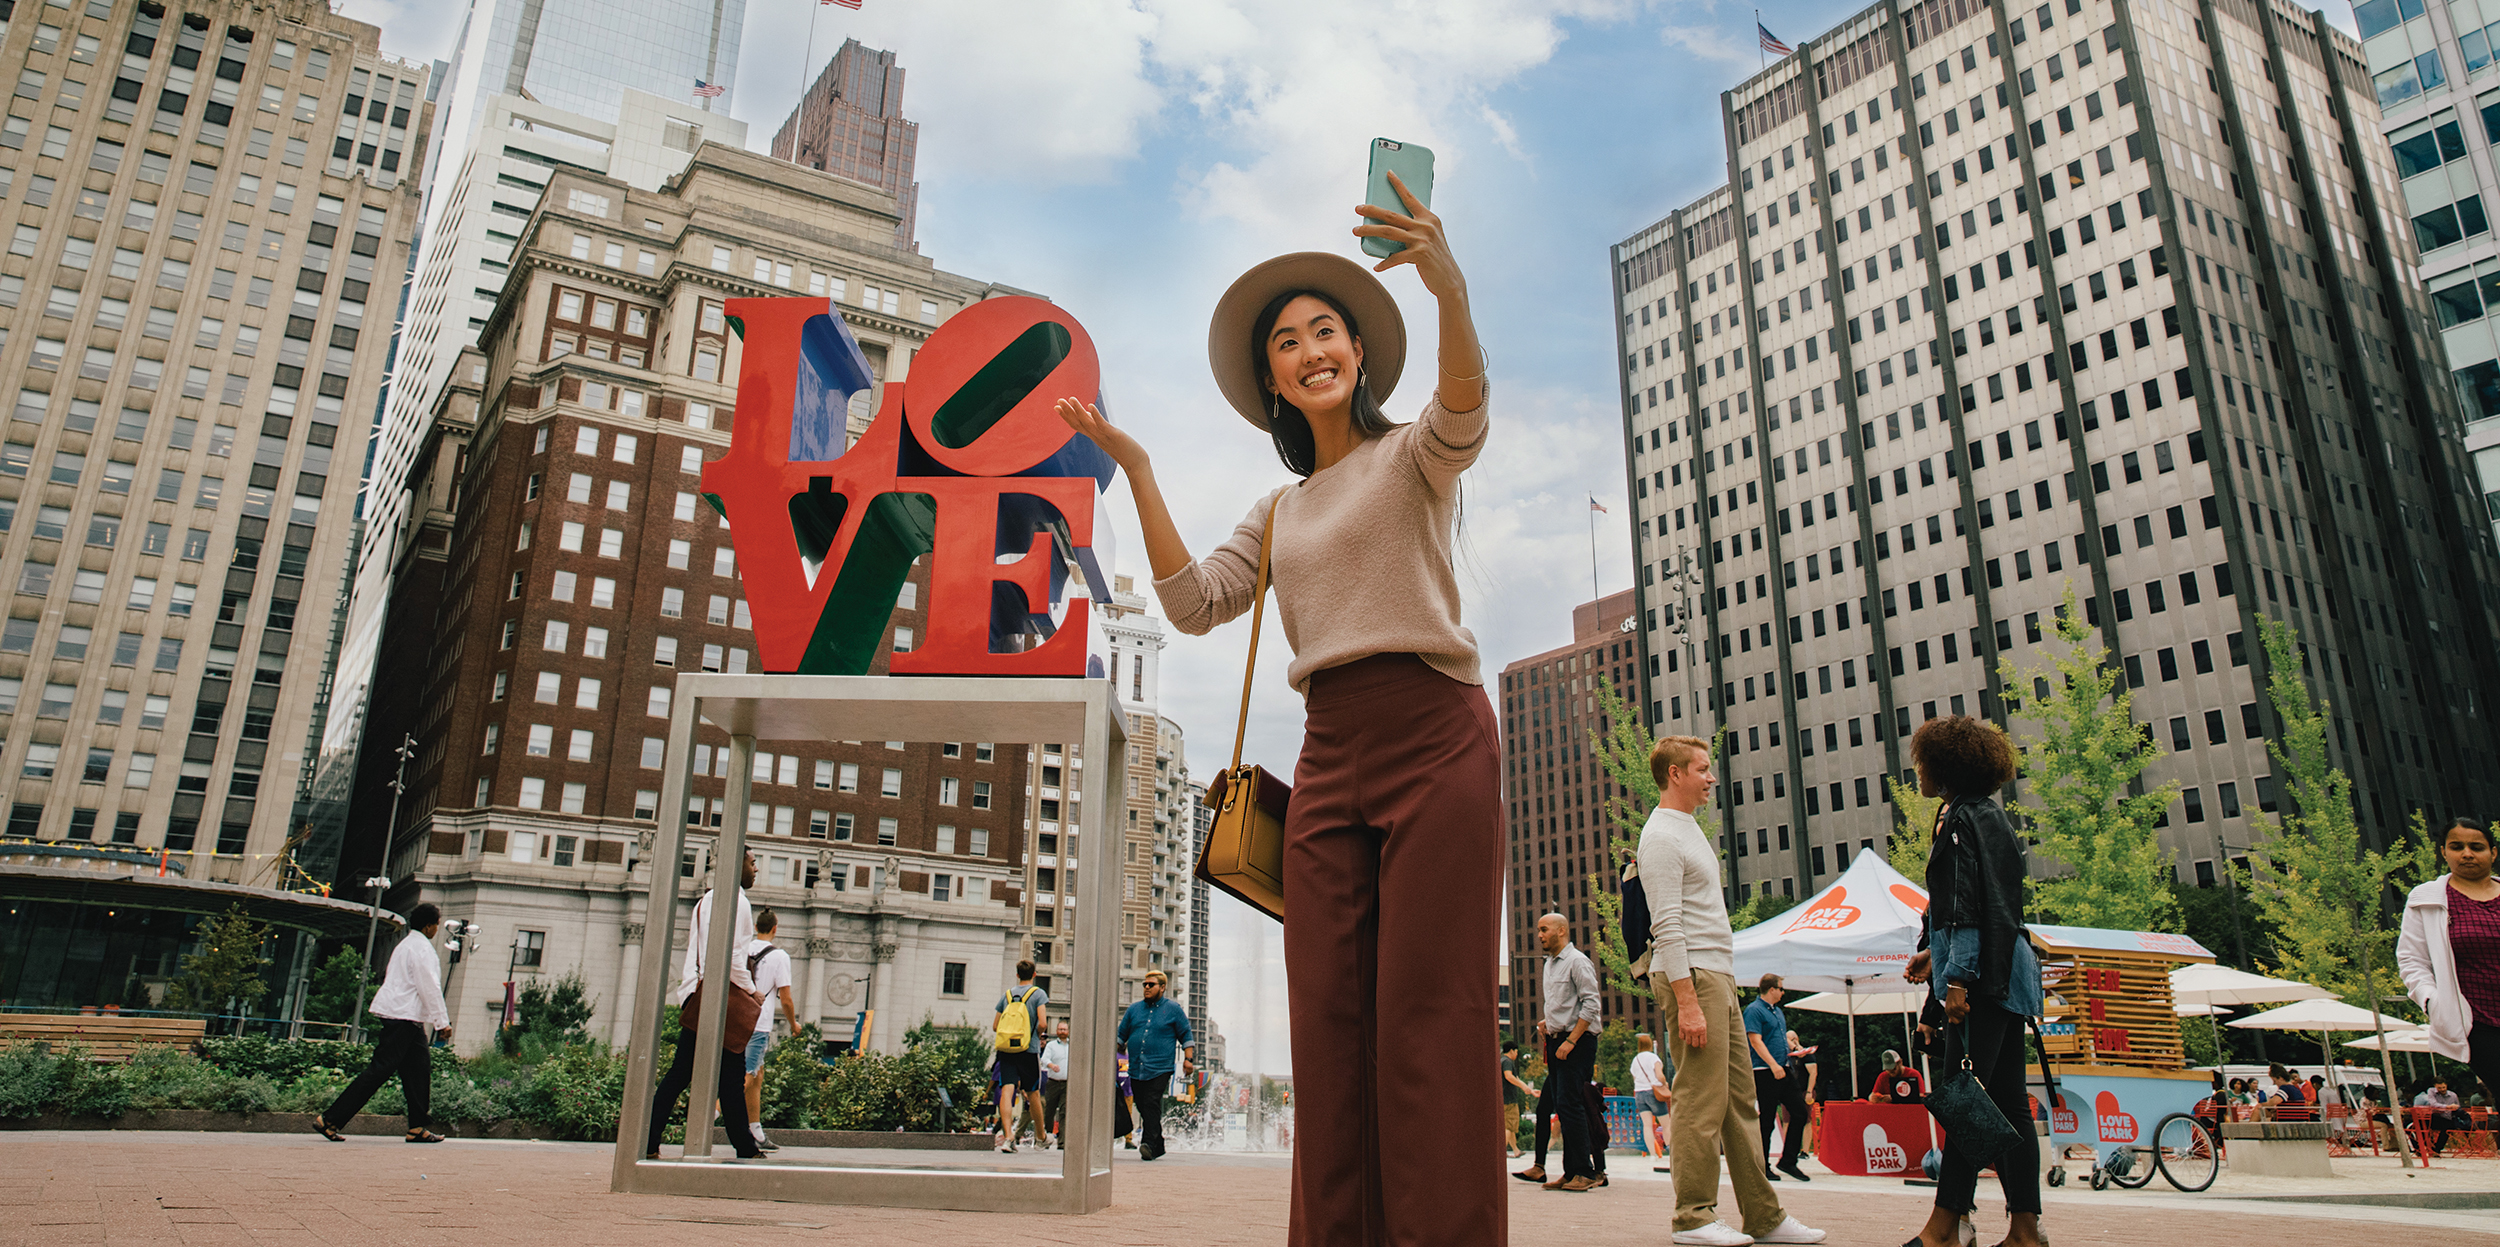 A woman wearing auburn pants, a beige sweater, and a tan hat poses for a selfie in front of the iconic red LOVE sculpture in LOVE Park. People throughout the space are shown behind her.